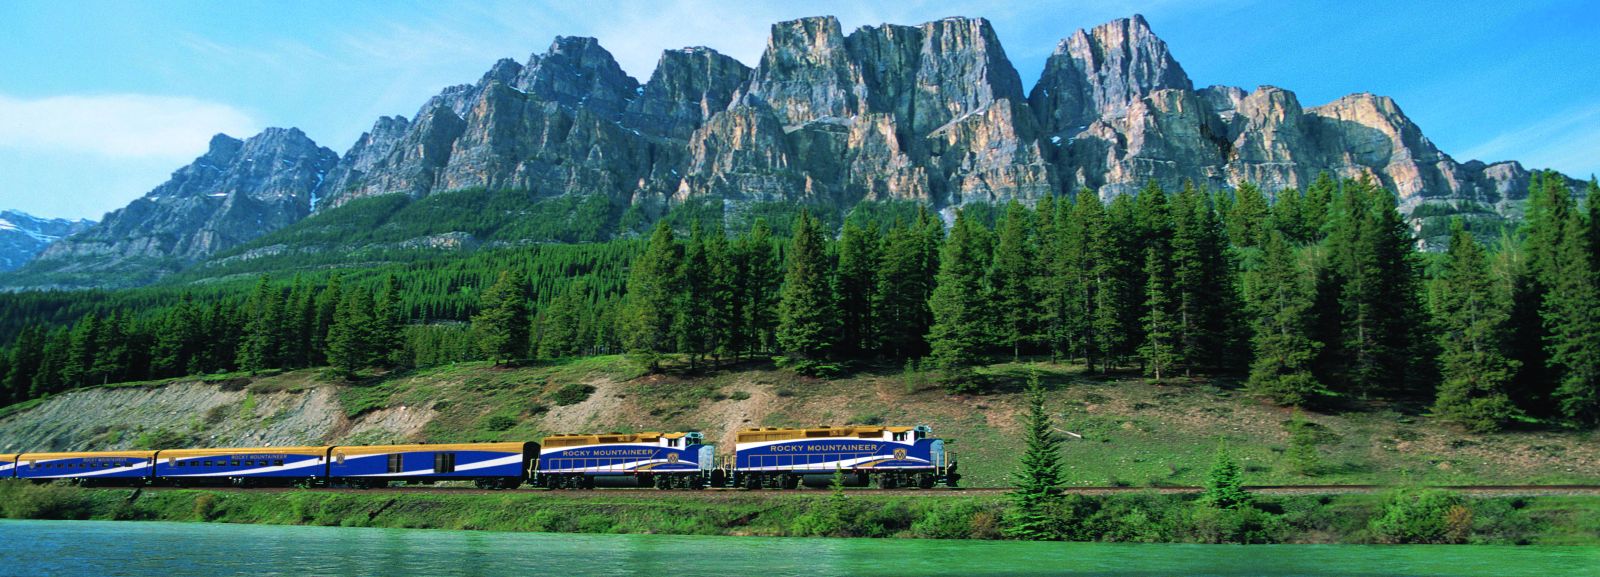 Rocky Mountain Train, a winter train journey in Canda going pass the Canadian countryside of mountains and forests